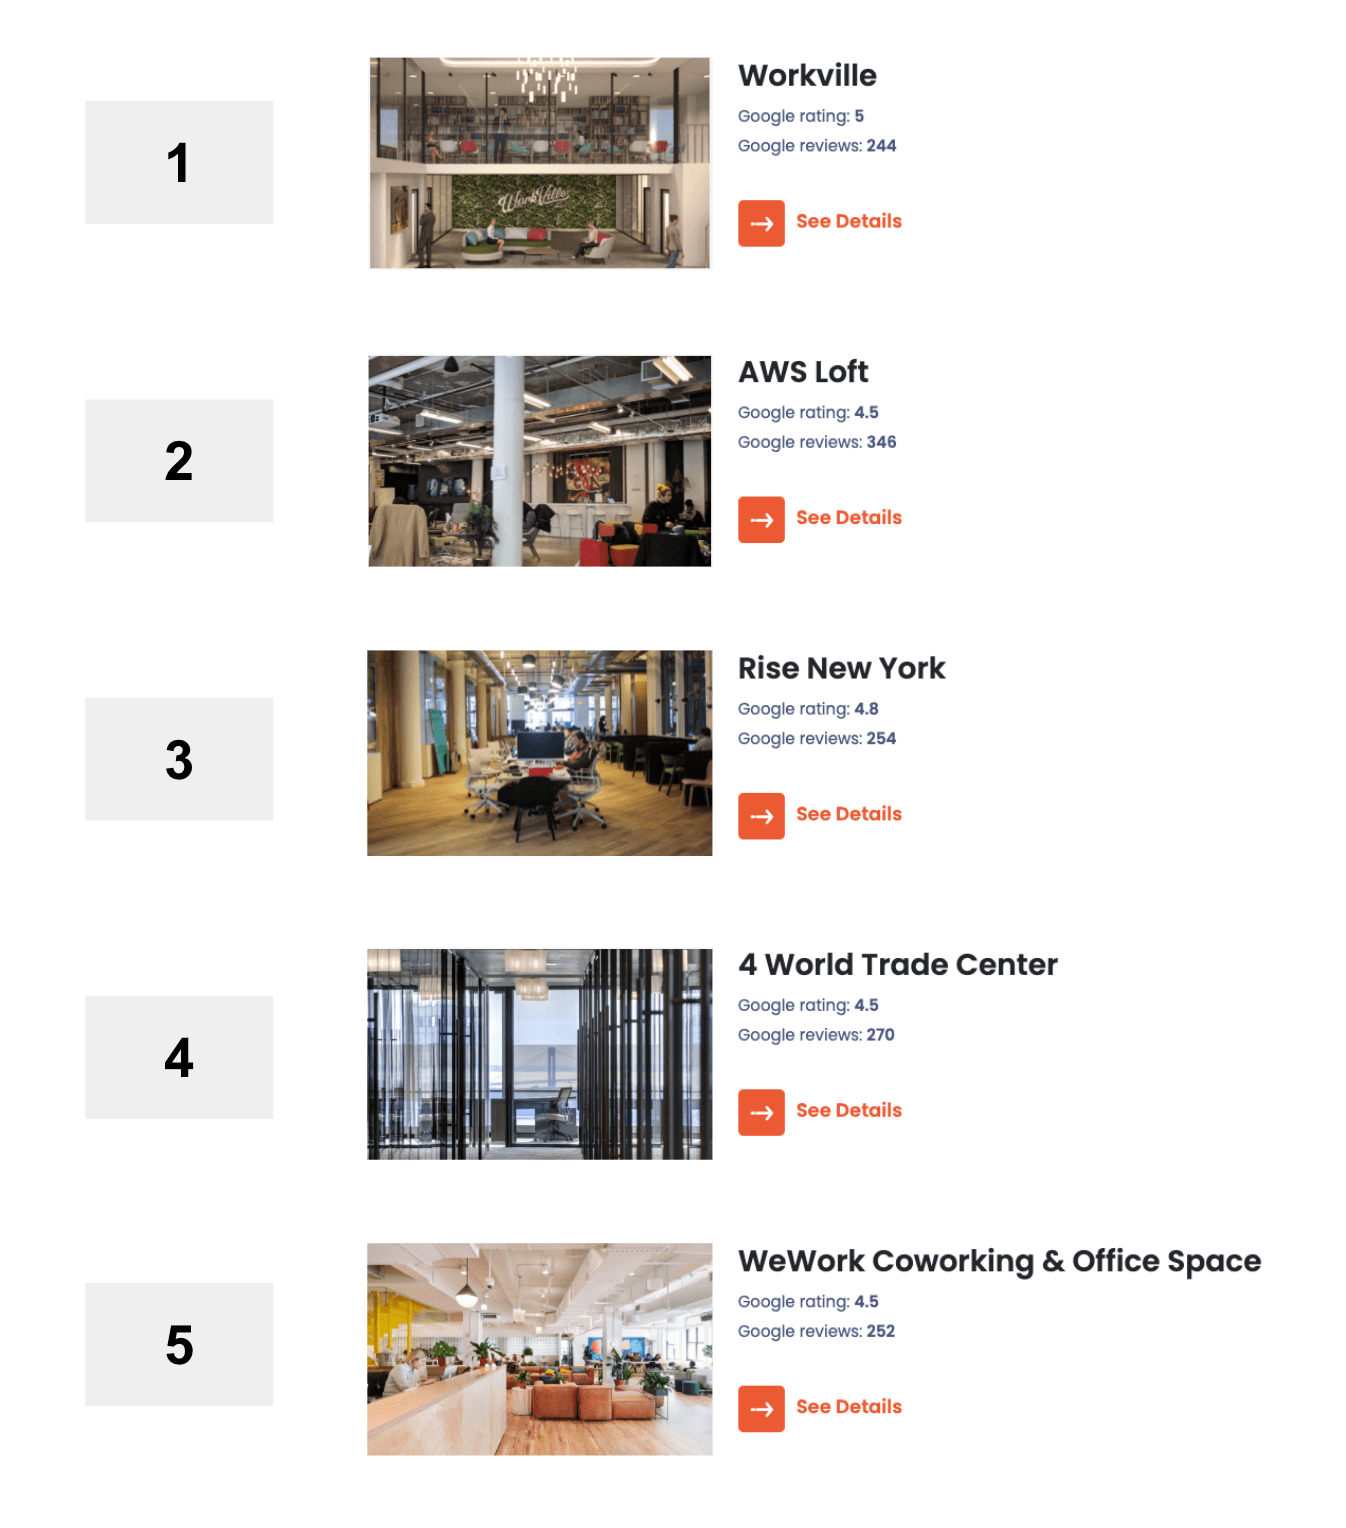 The best coworking spaces in New York City according to user data